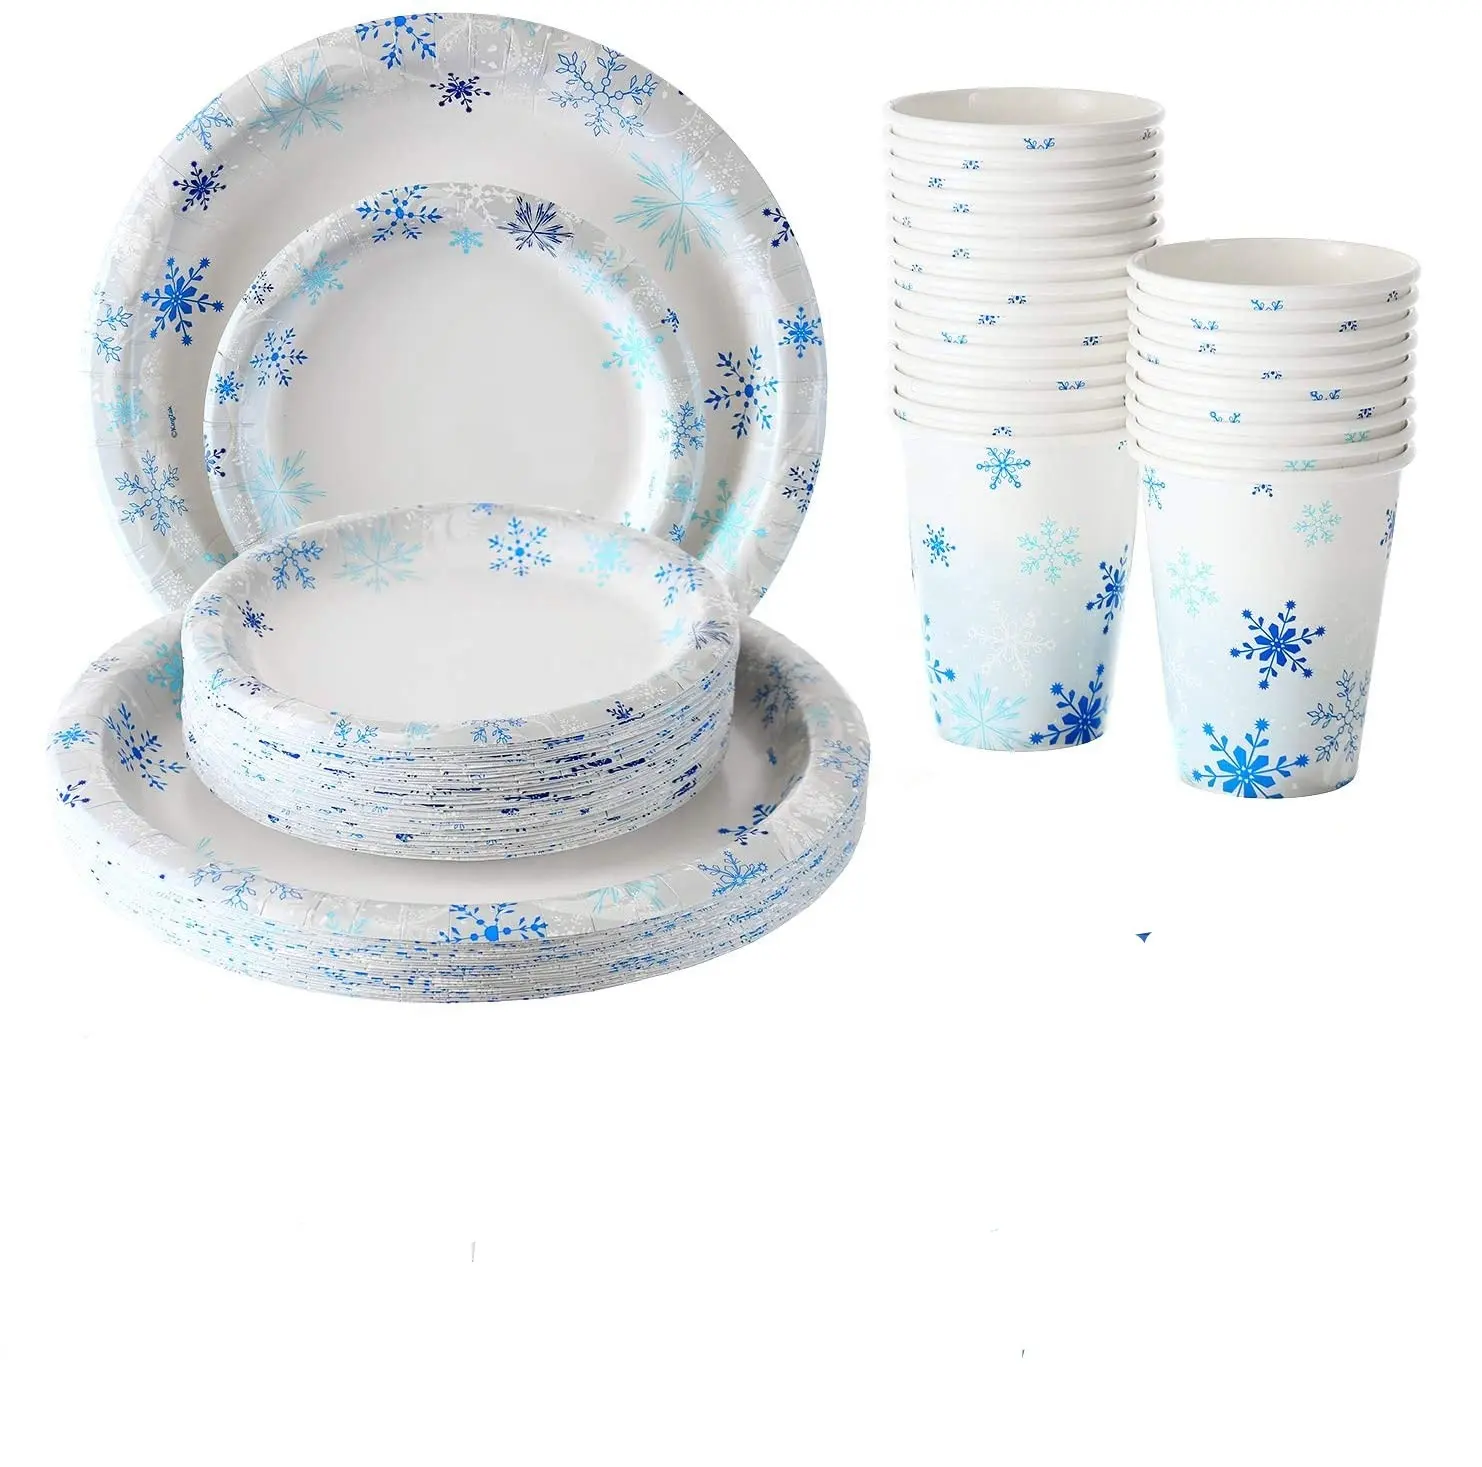 Holiday Paper plates Plates Napkins Cups Party Plates Snowflakes Design Great for Christmas